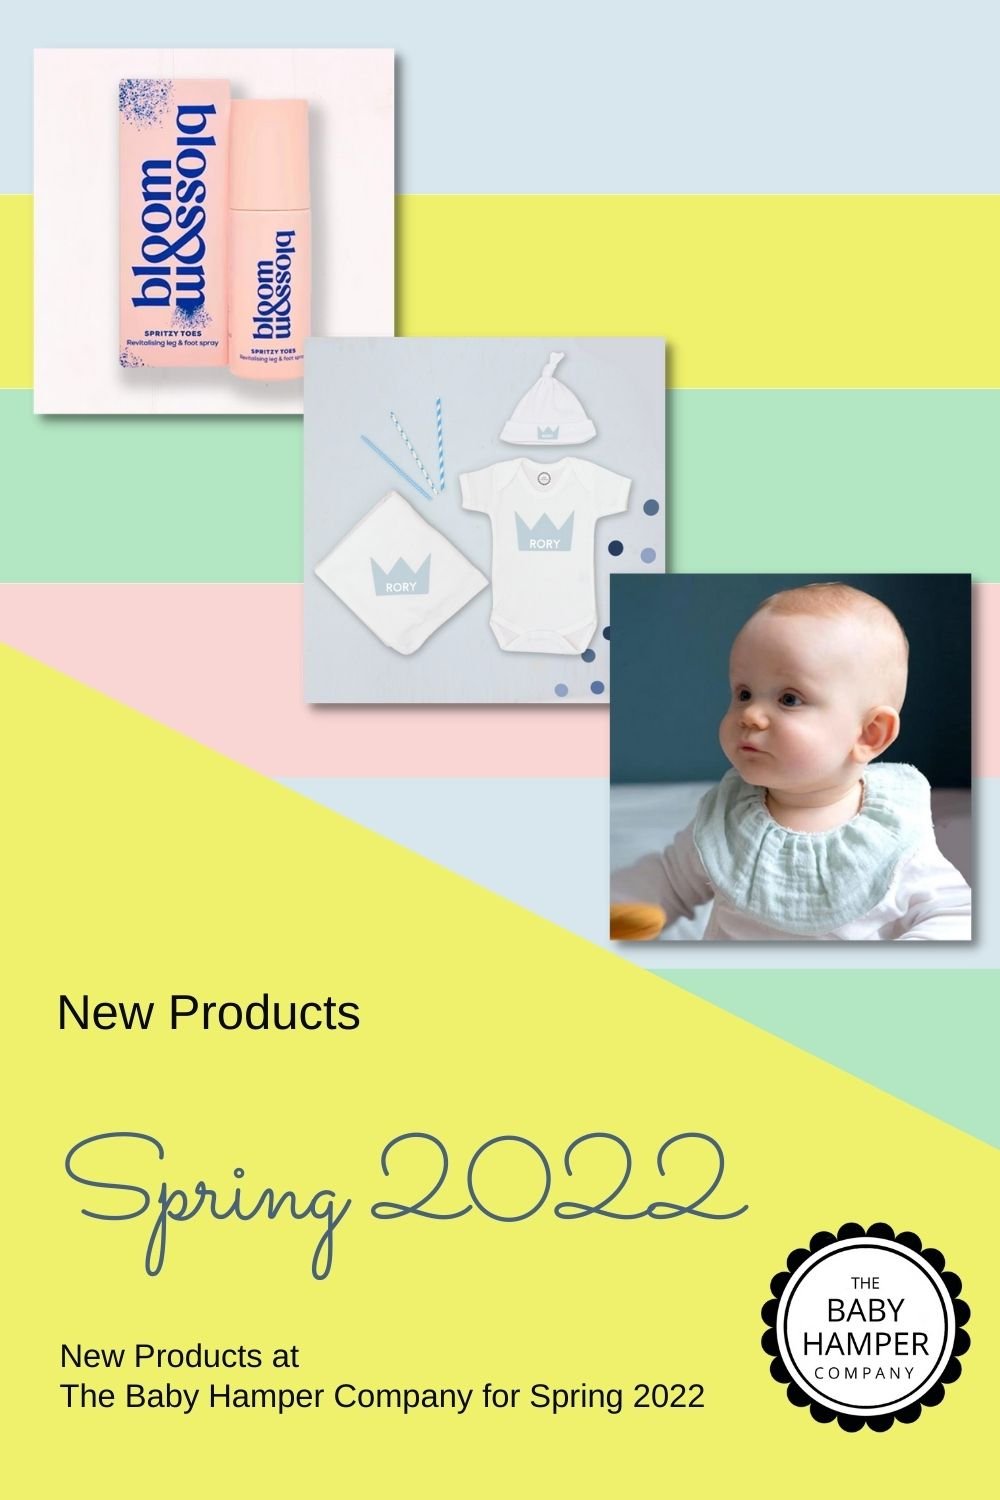 New Products at The Baby Hamper Company for Spring 2022